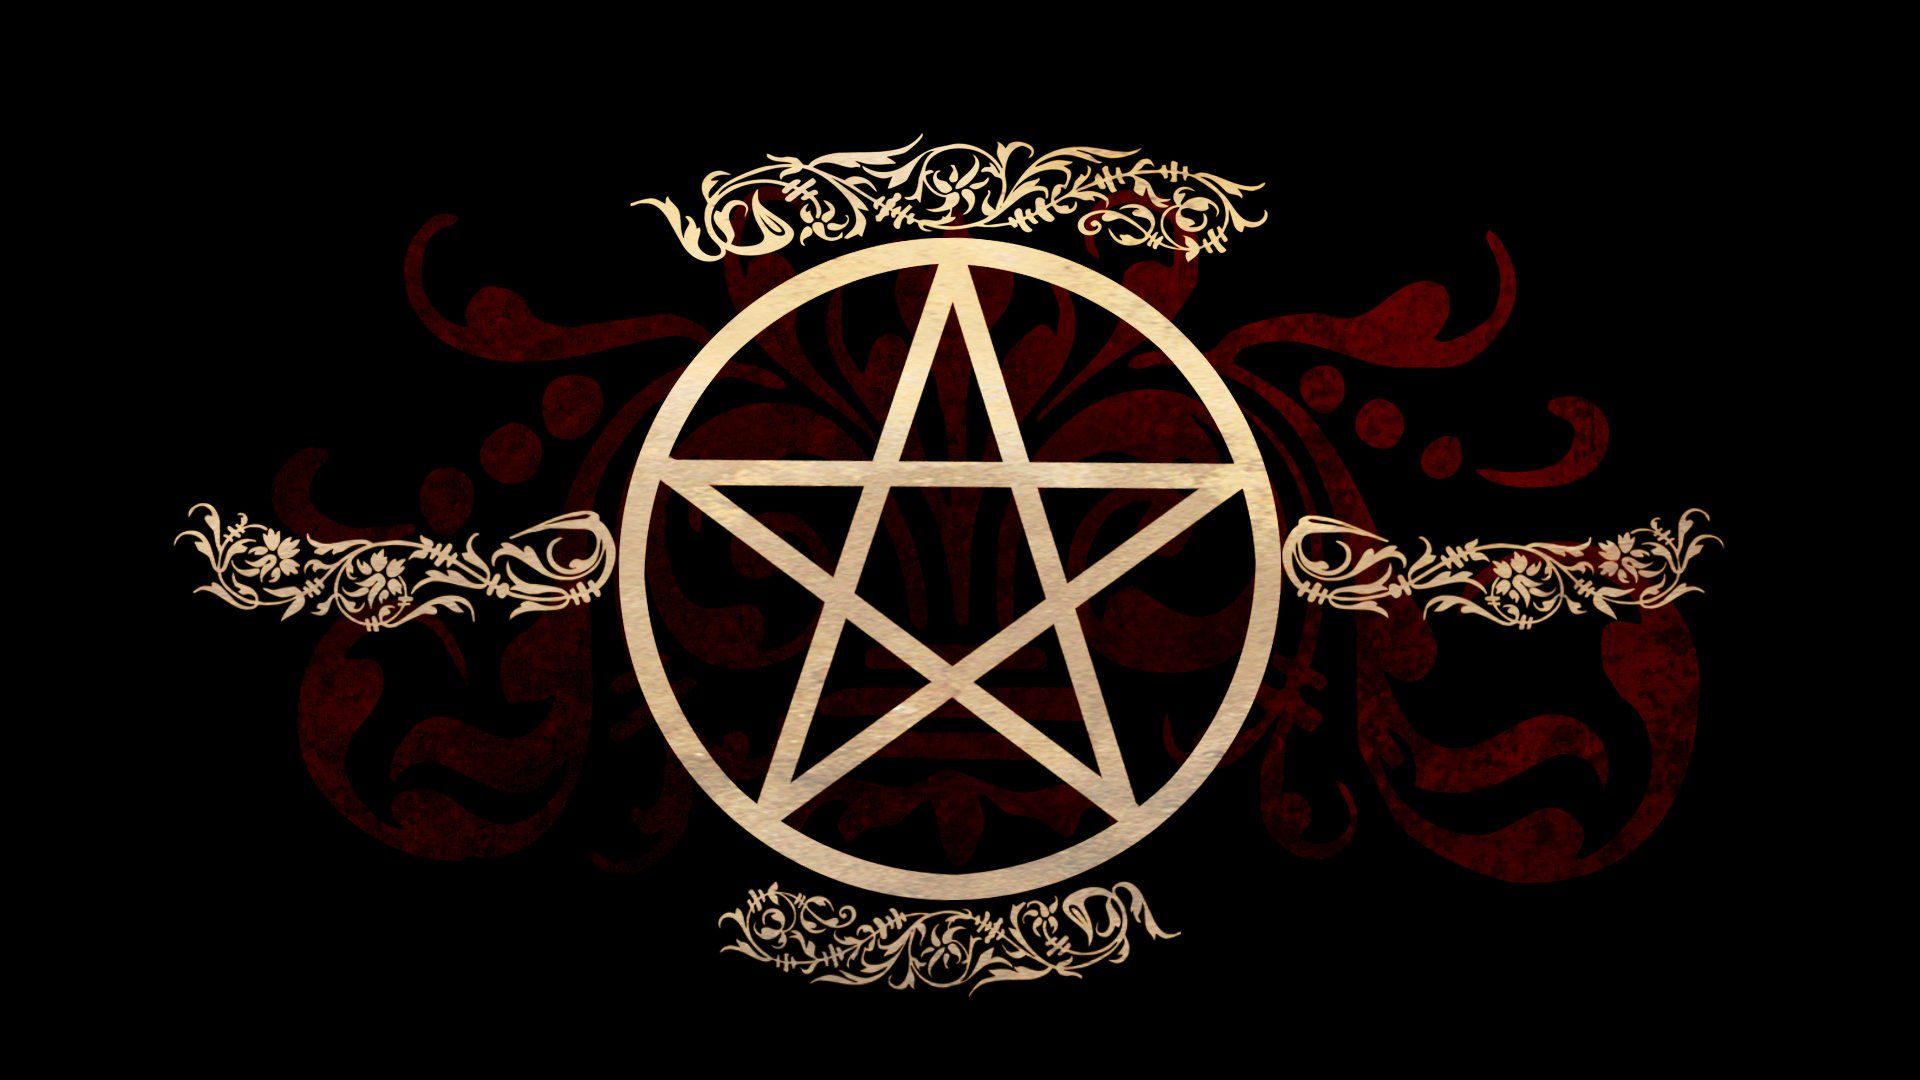 Wicca Wallpaper for Computer. Wiccan .tr.com